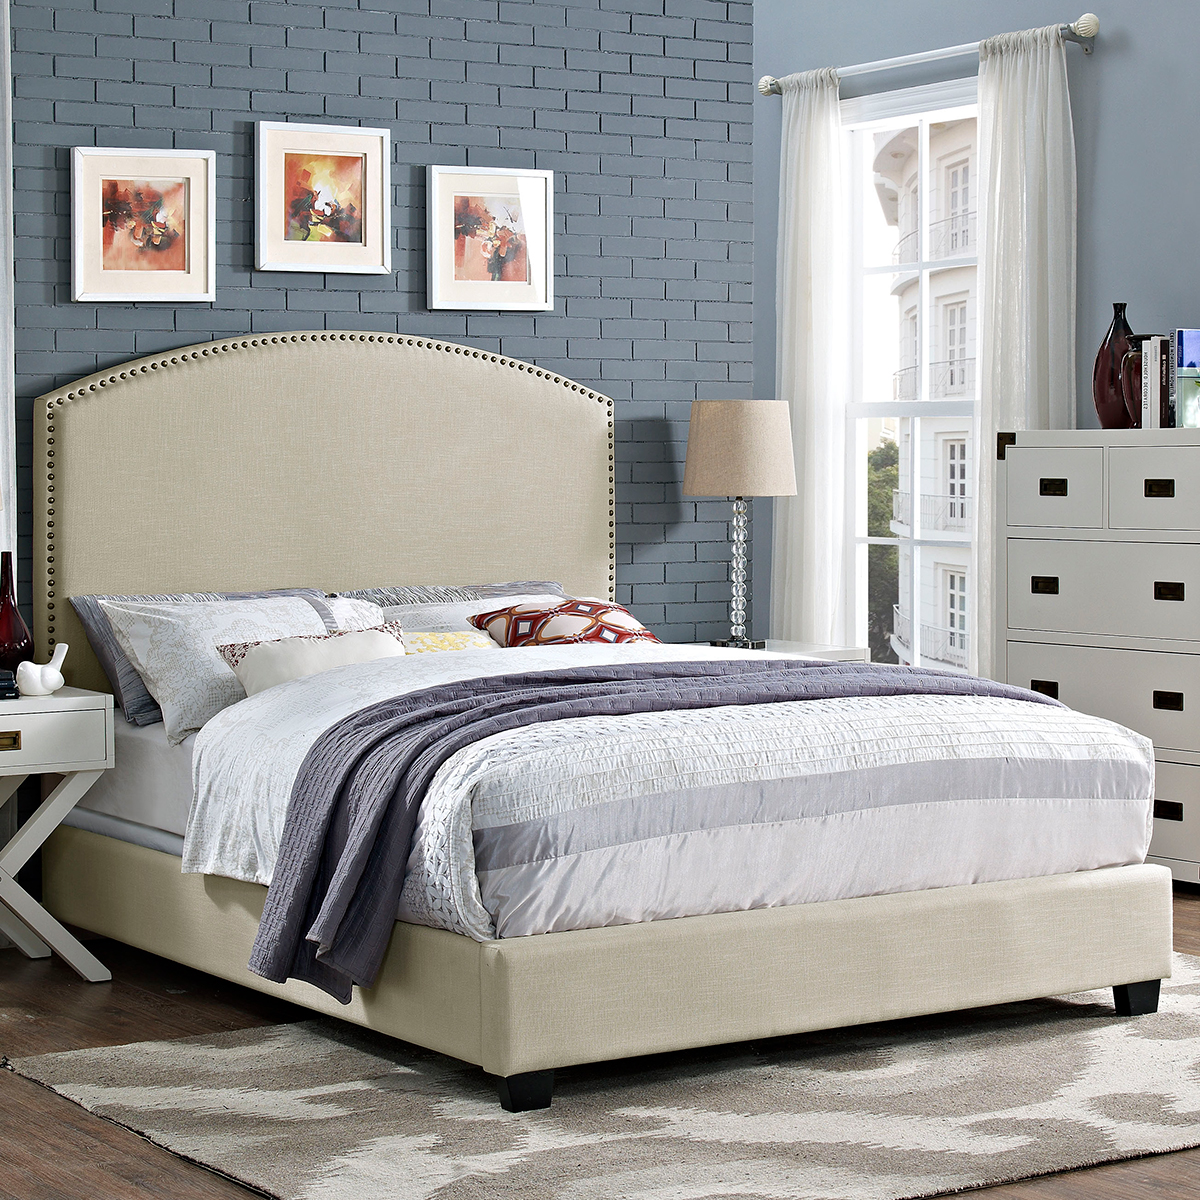 Cassie Curved Upholstered Queen Bedset, Creme Linen